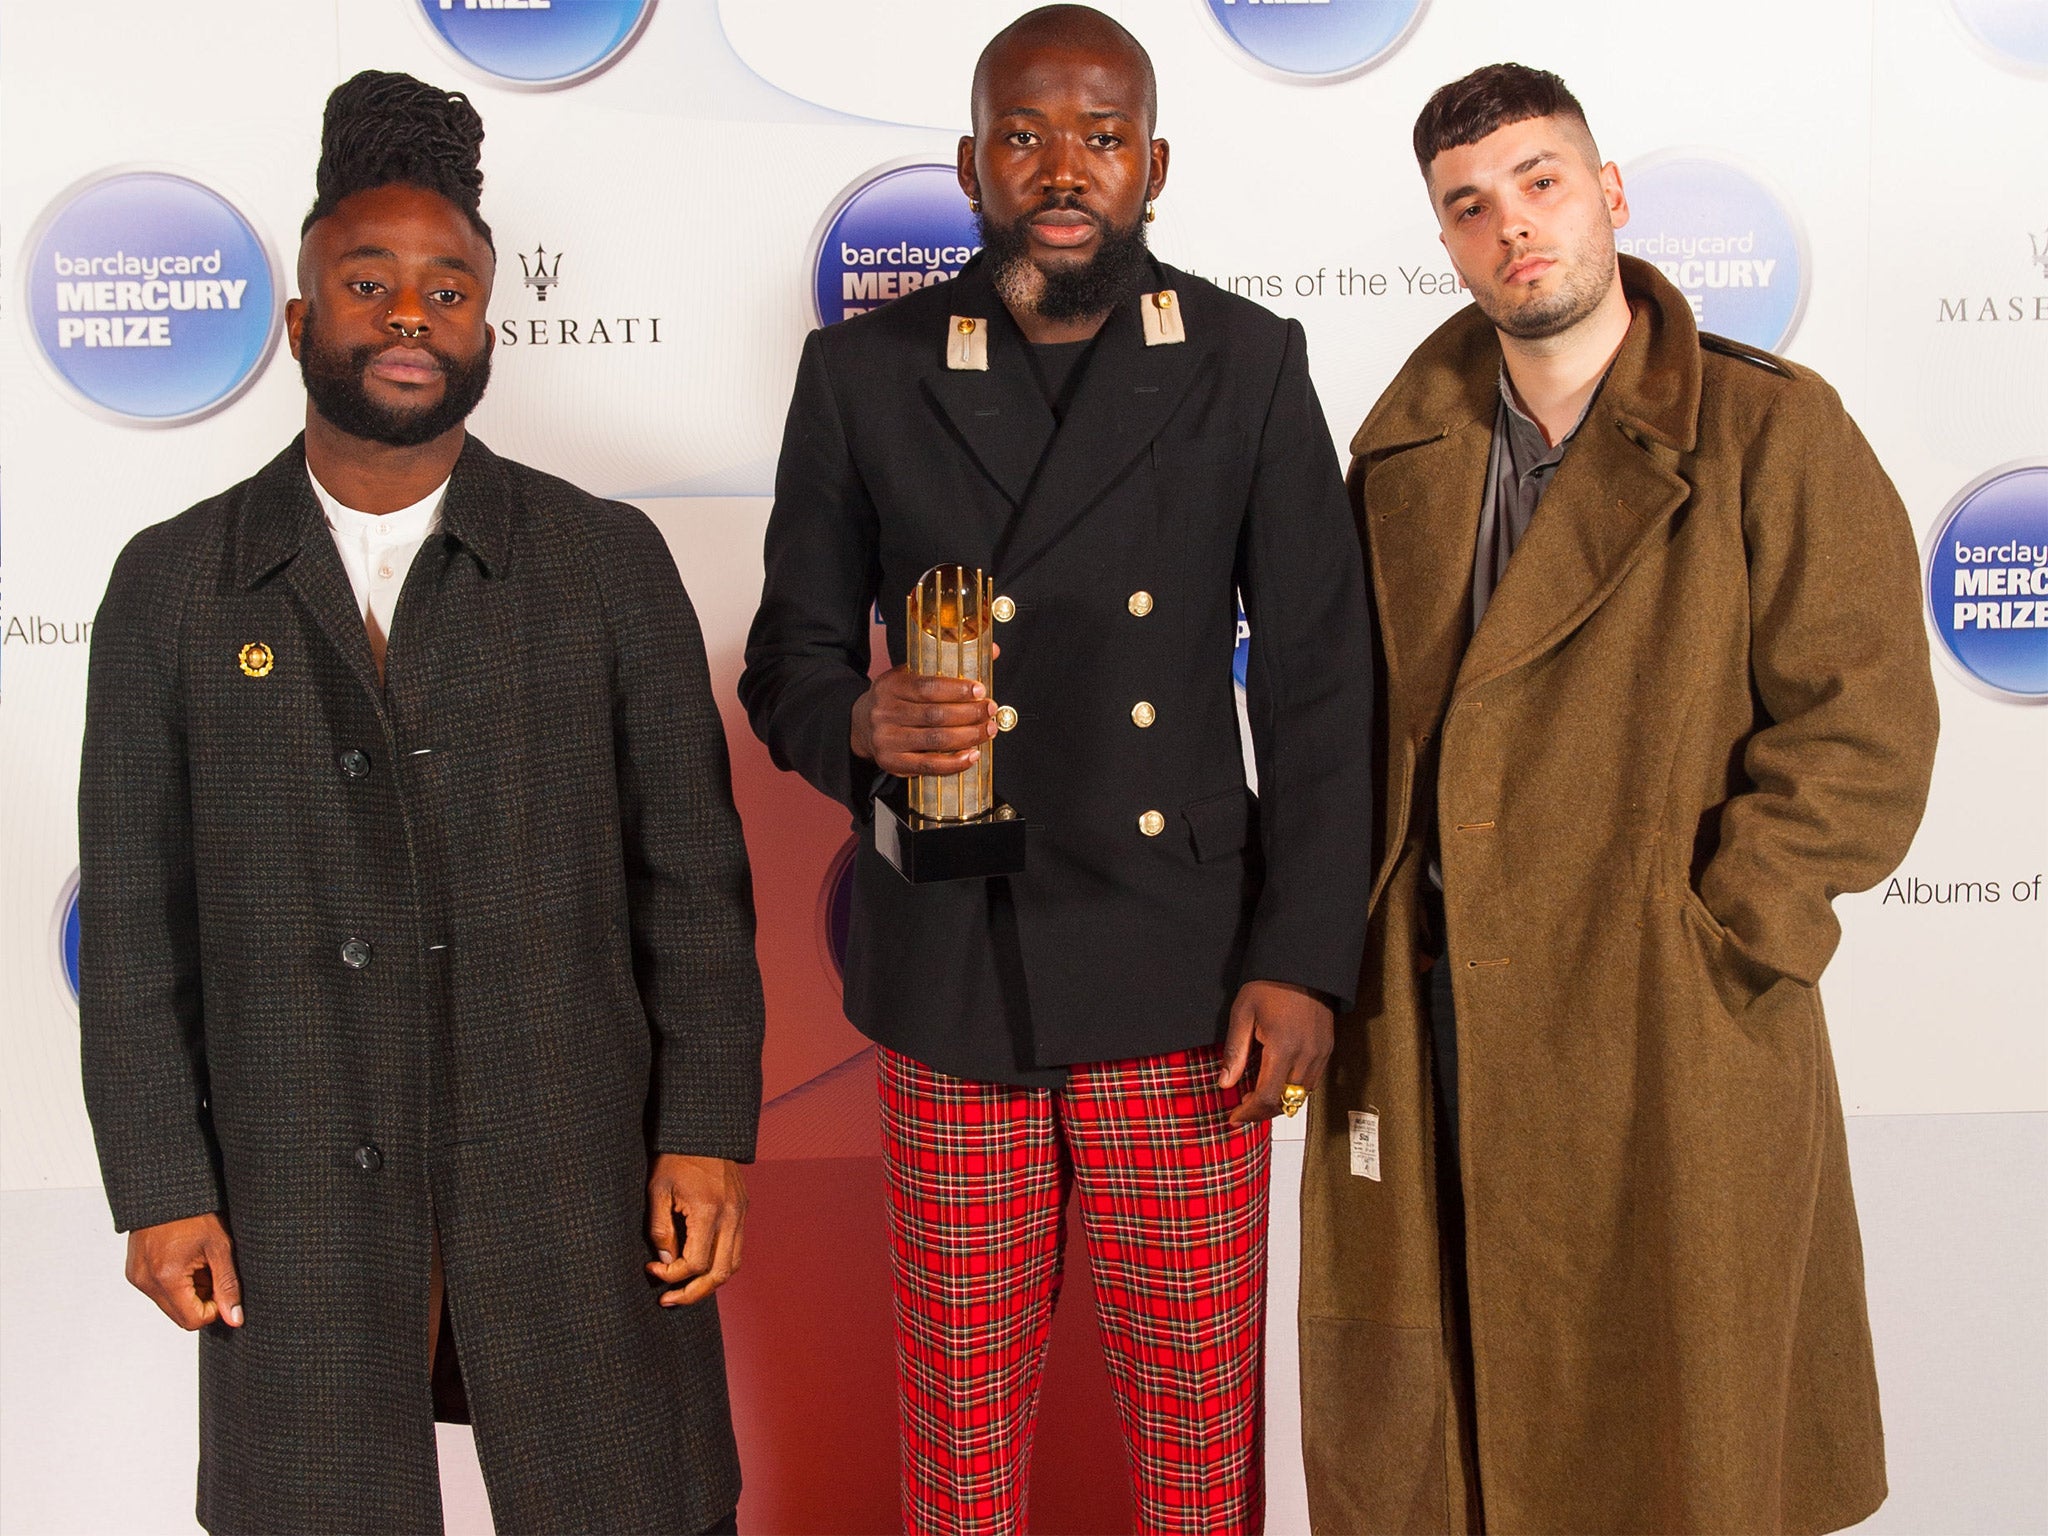 Alloysious Massaquoi, 'G' Hastings and Kayus Bankole of Young Fathers are the surprise winners of this year's Mercury Music Prize